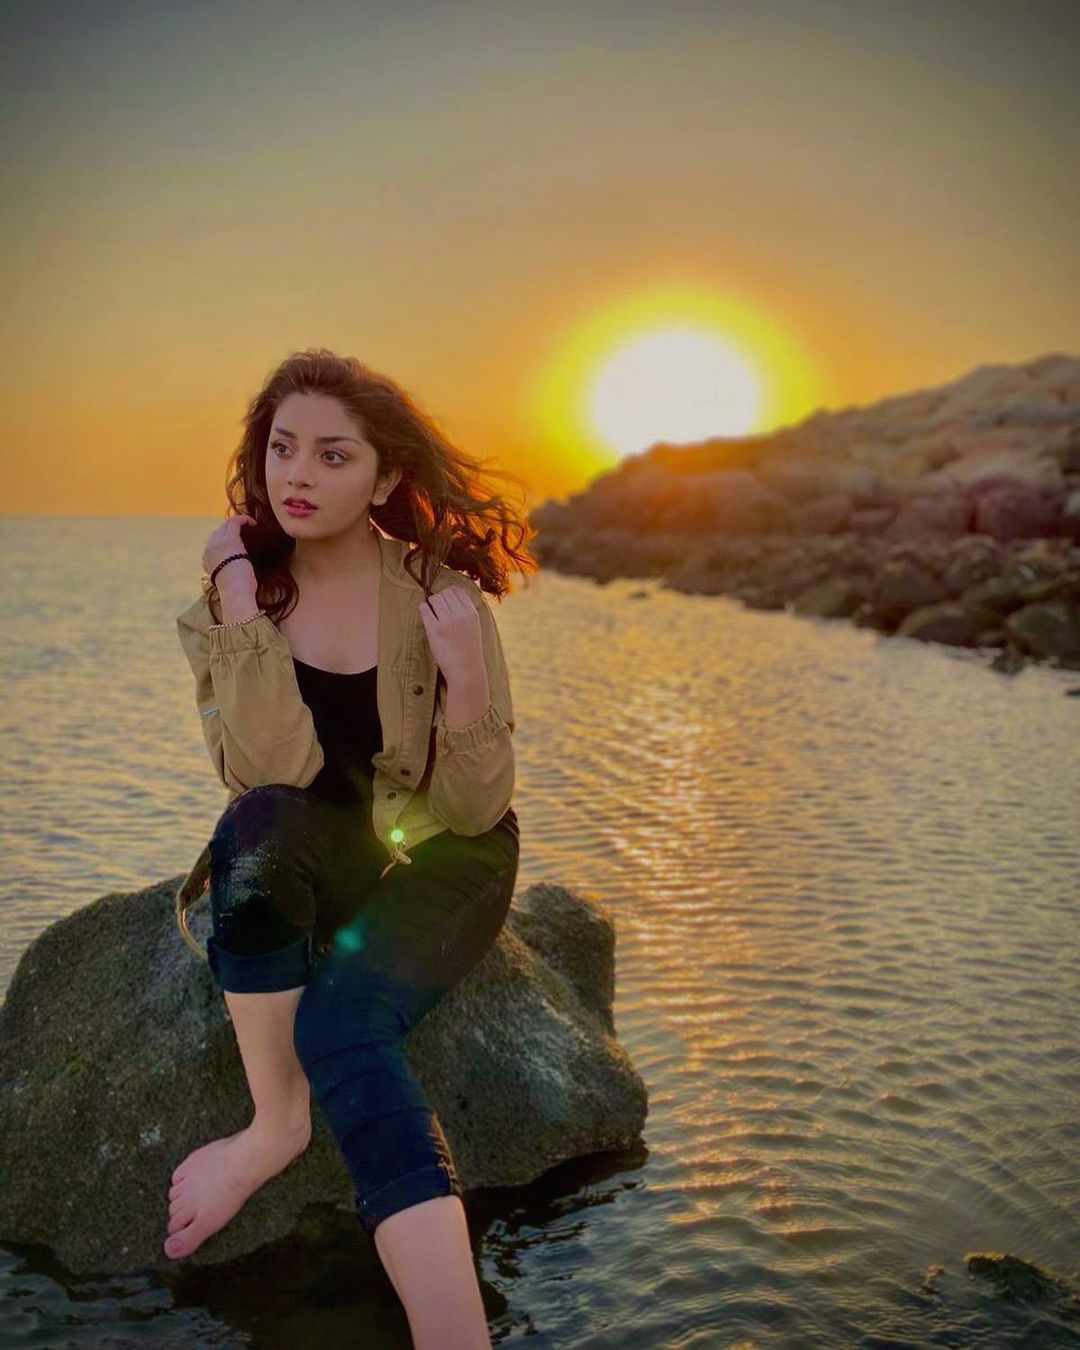 Alizeh Shah Looks Glamorous in These Hot Clicks from Her Insta Profile!